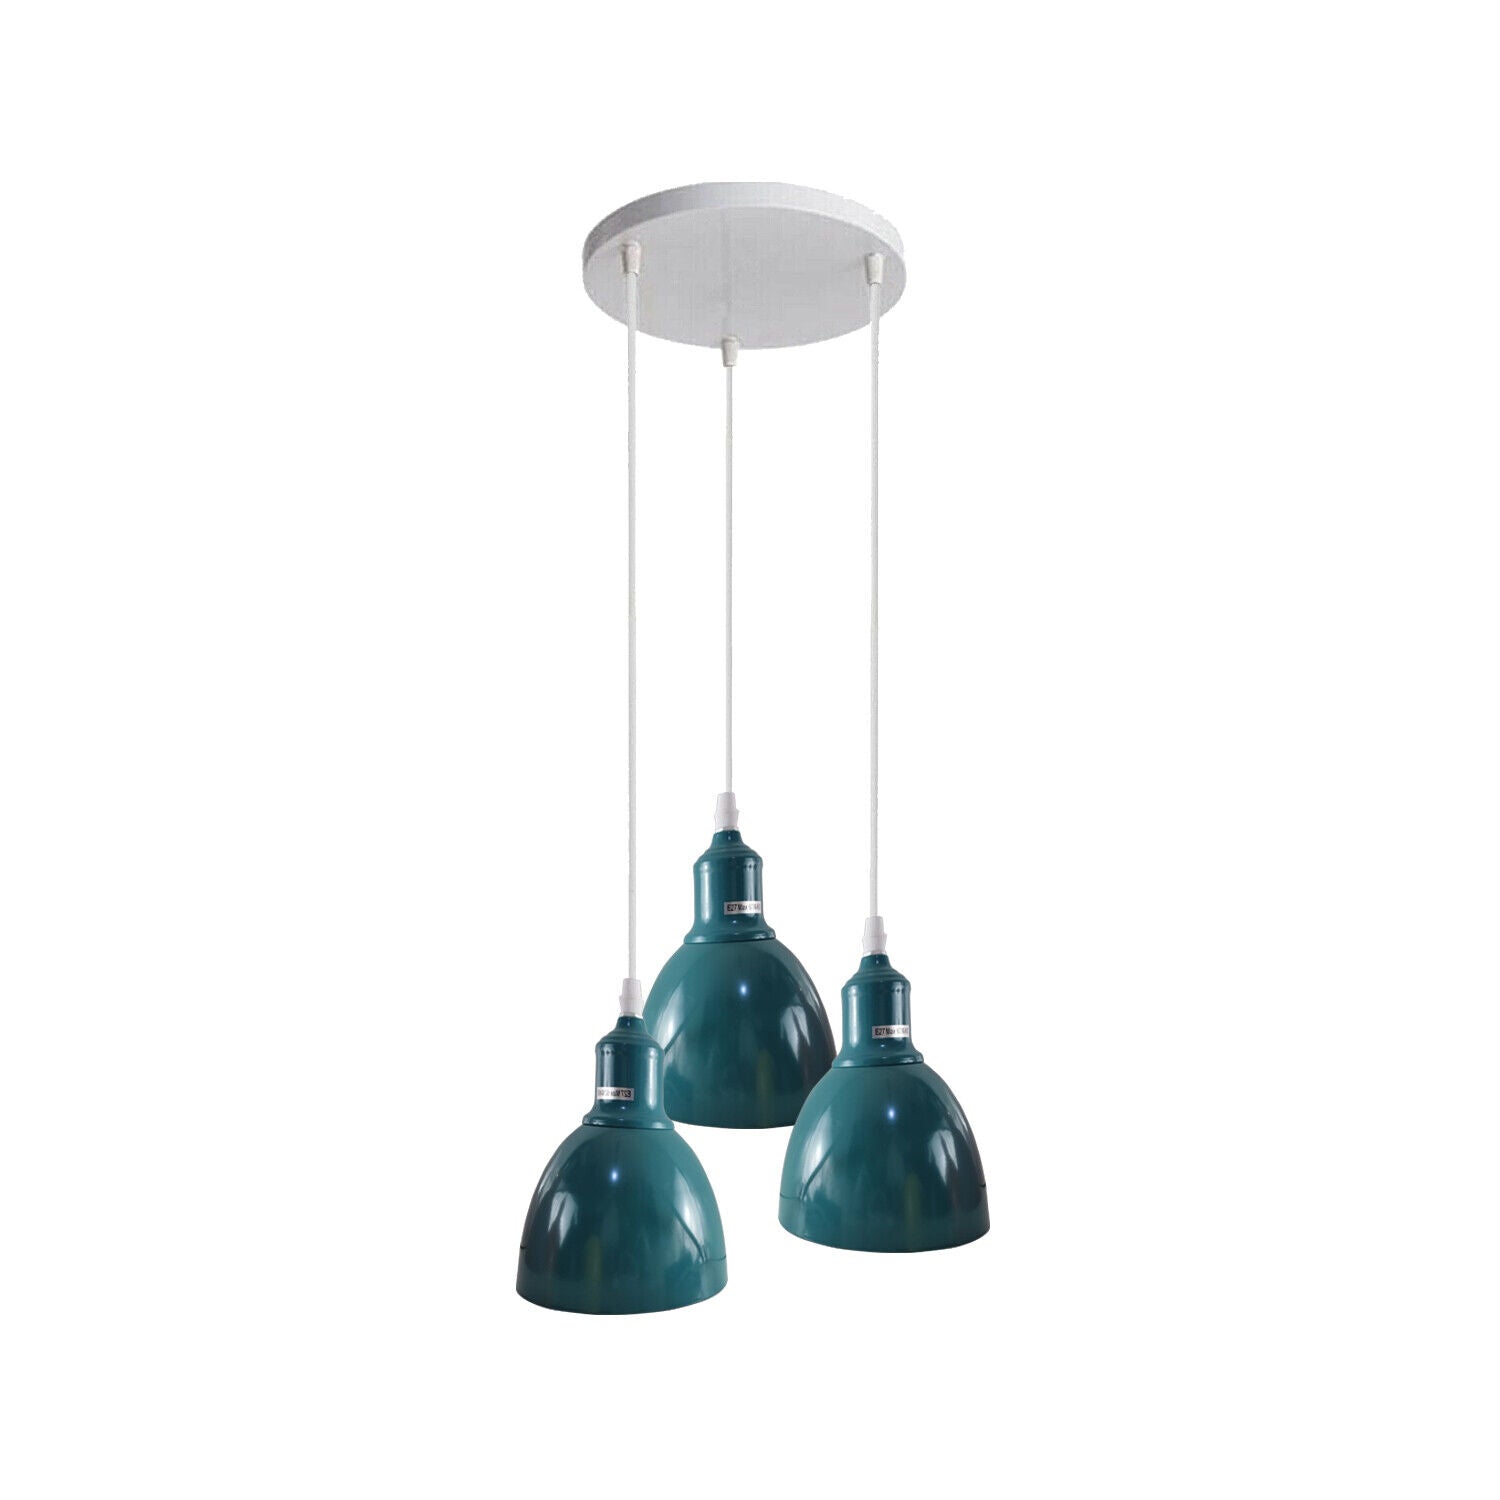 Industrial 3Way Retro Cluster Ceiling Pendent E27 Lamp|Ledsone.co.uk